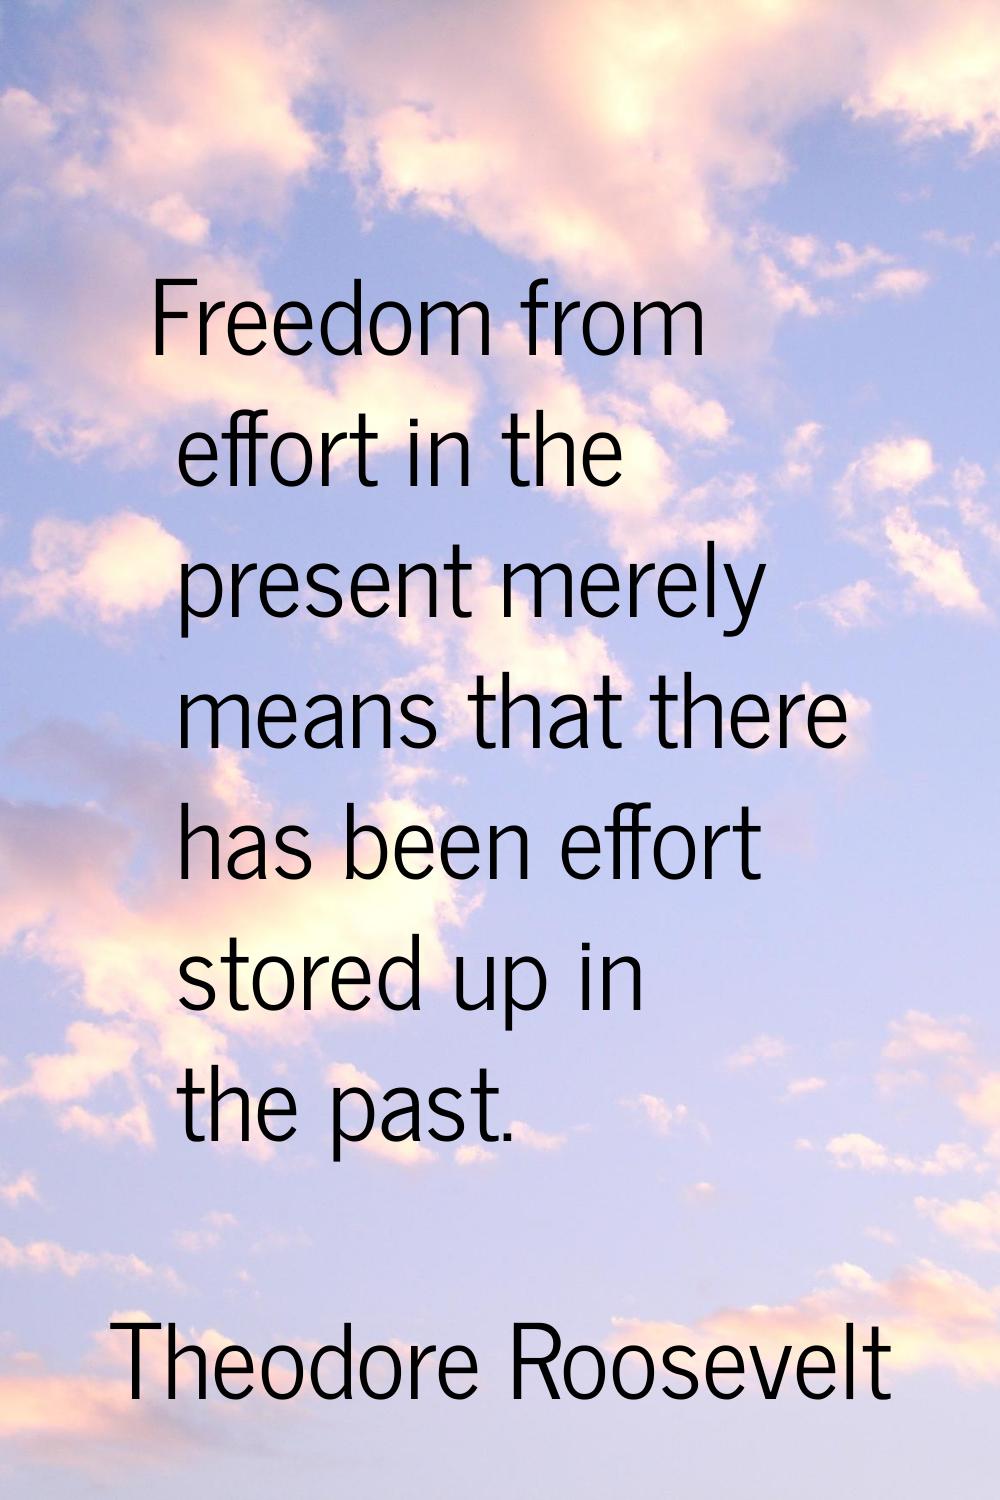 Freedom from effort in the present merely means that there has been effort stored up in the past.